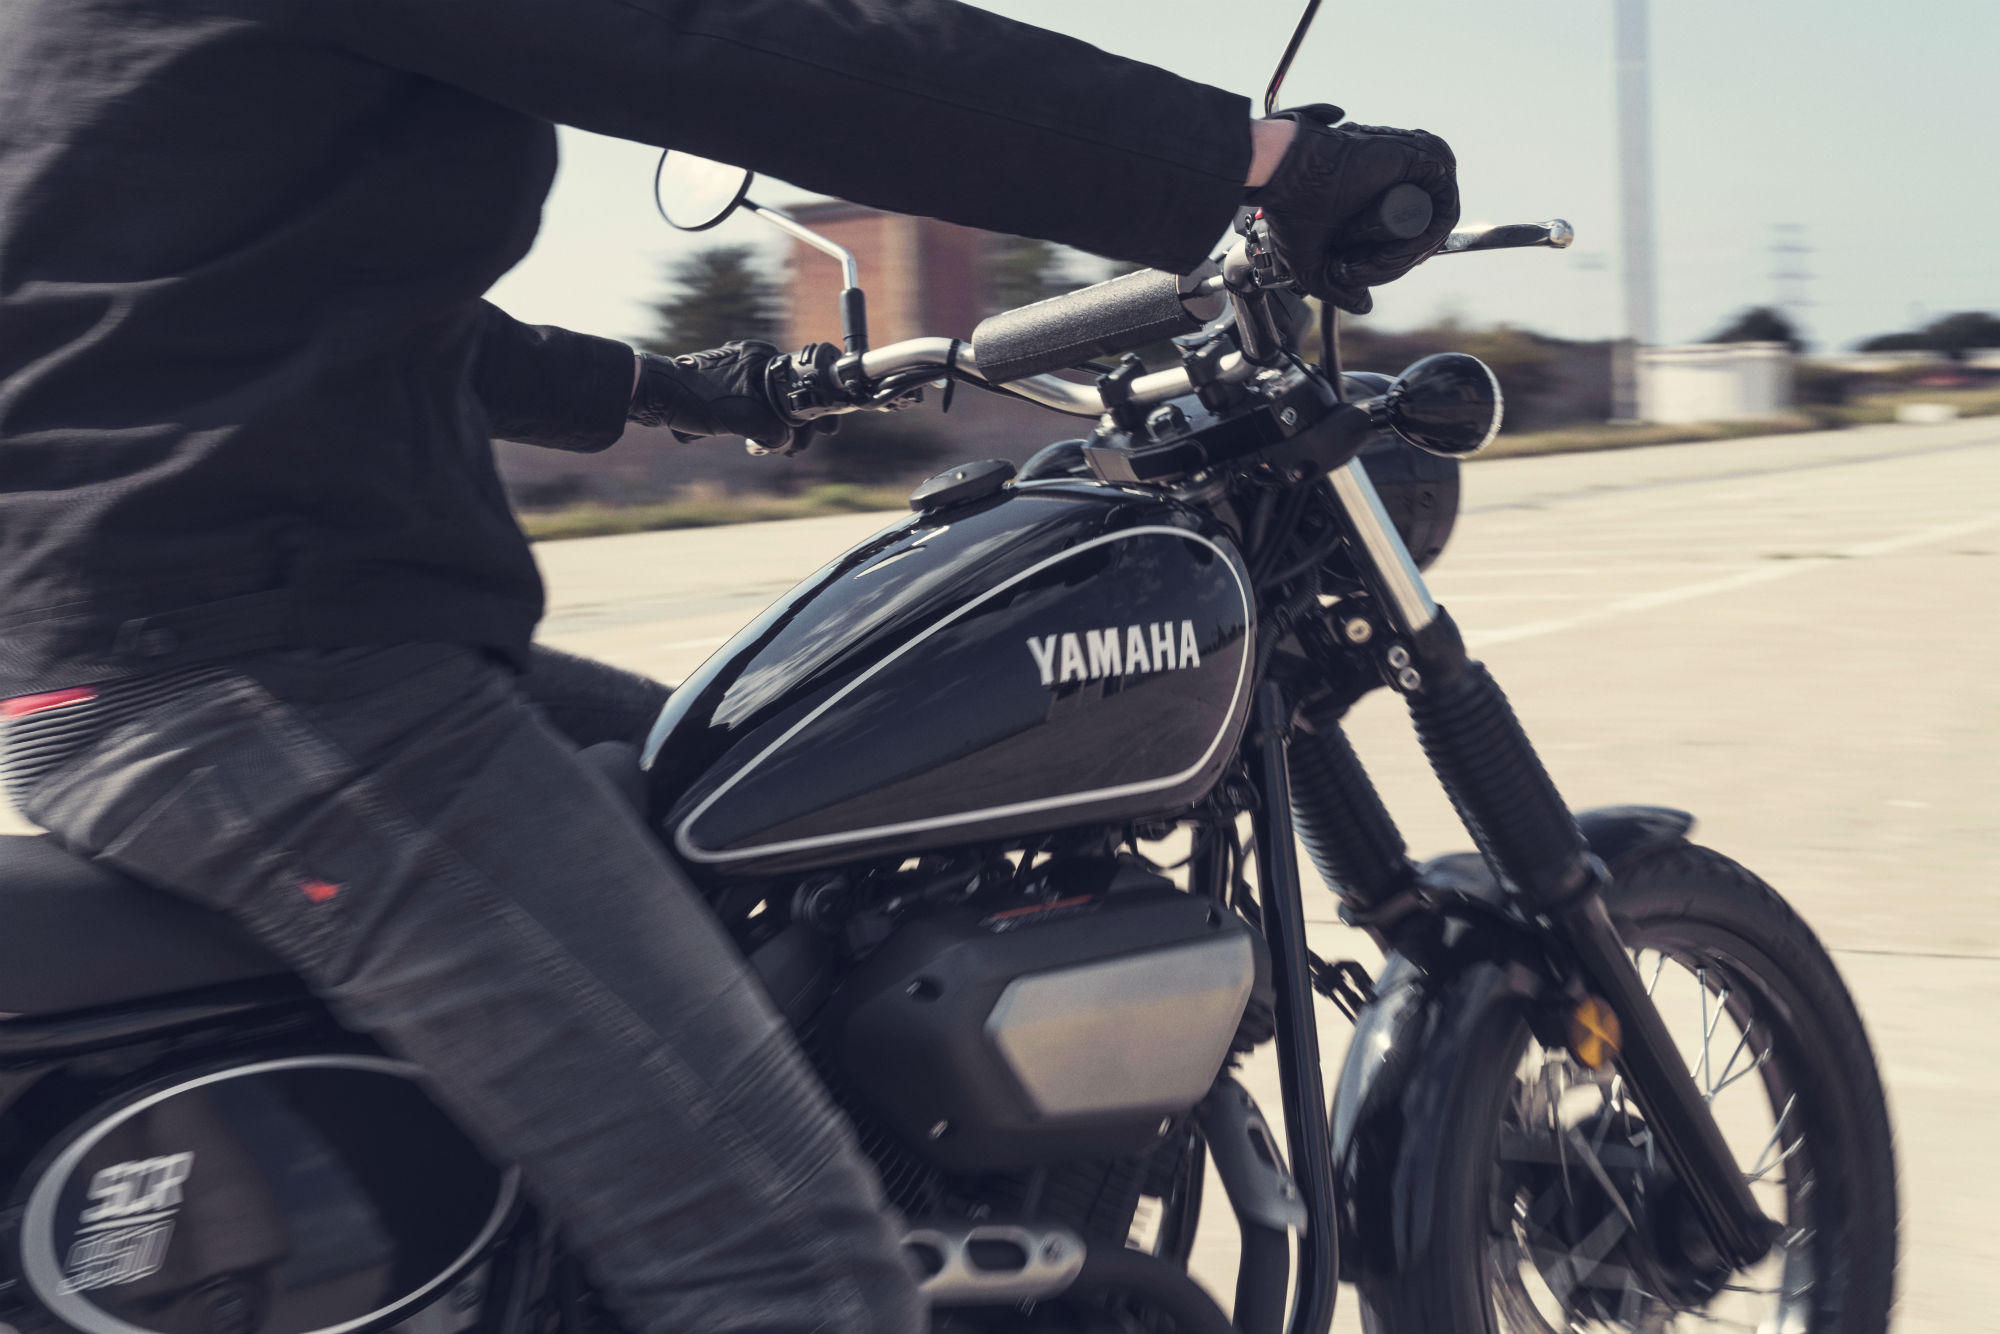 First ride: Yamaha SCR950 review